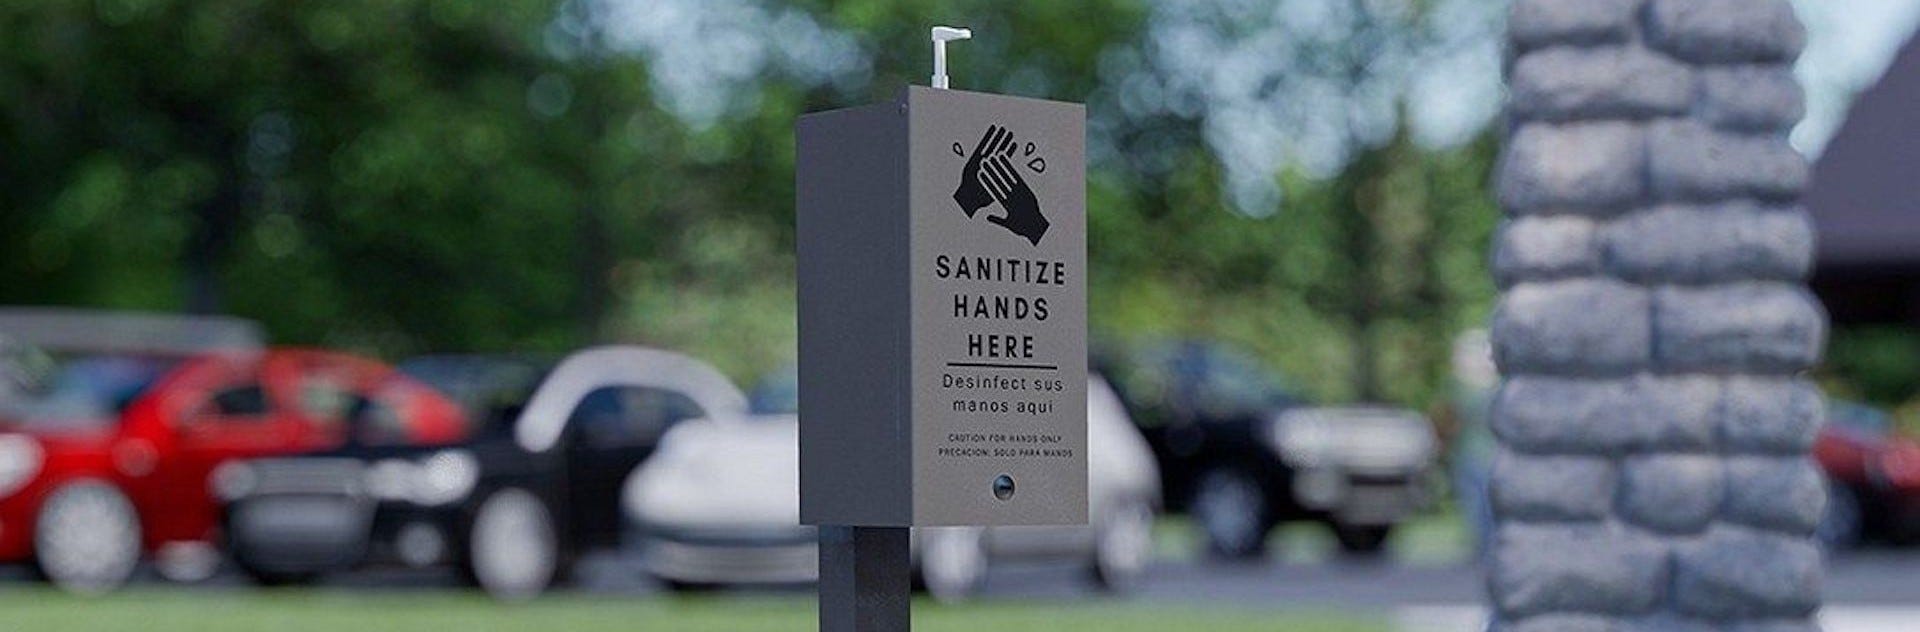 outdoor-hand-sanitizer-station-from-gametime